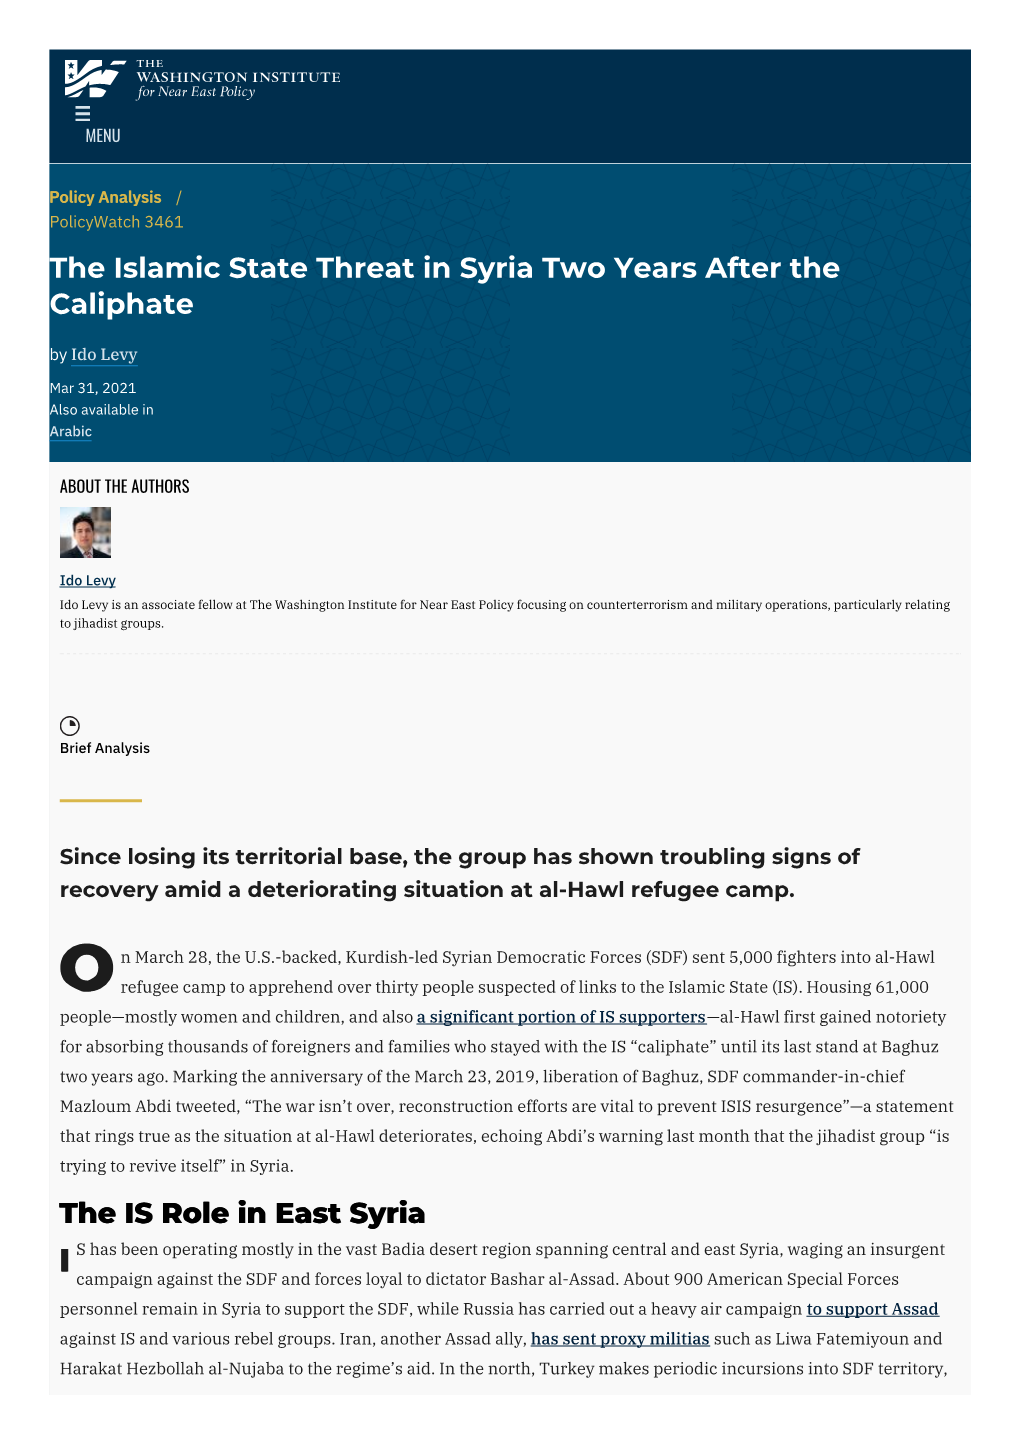 The Islamic State Threat in Syria Two Years After the Caliphate by Ido Levy